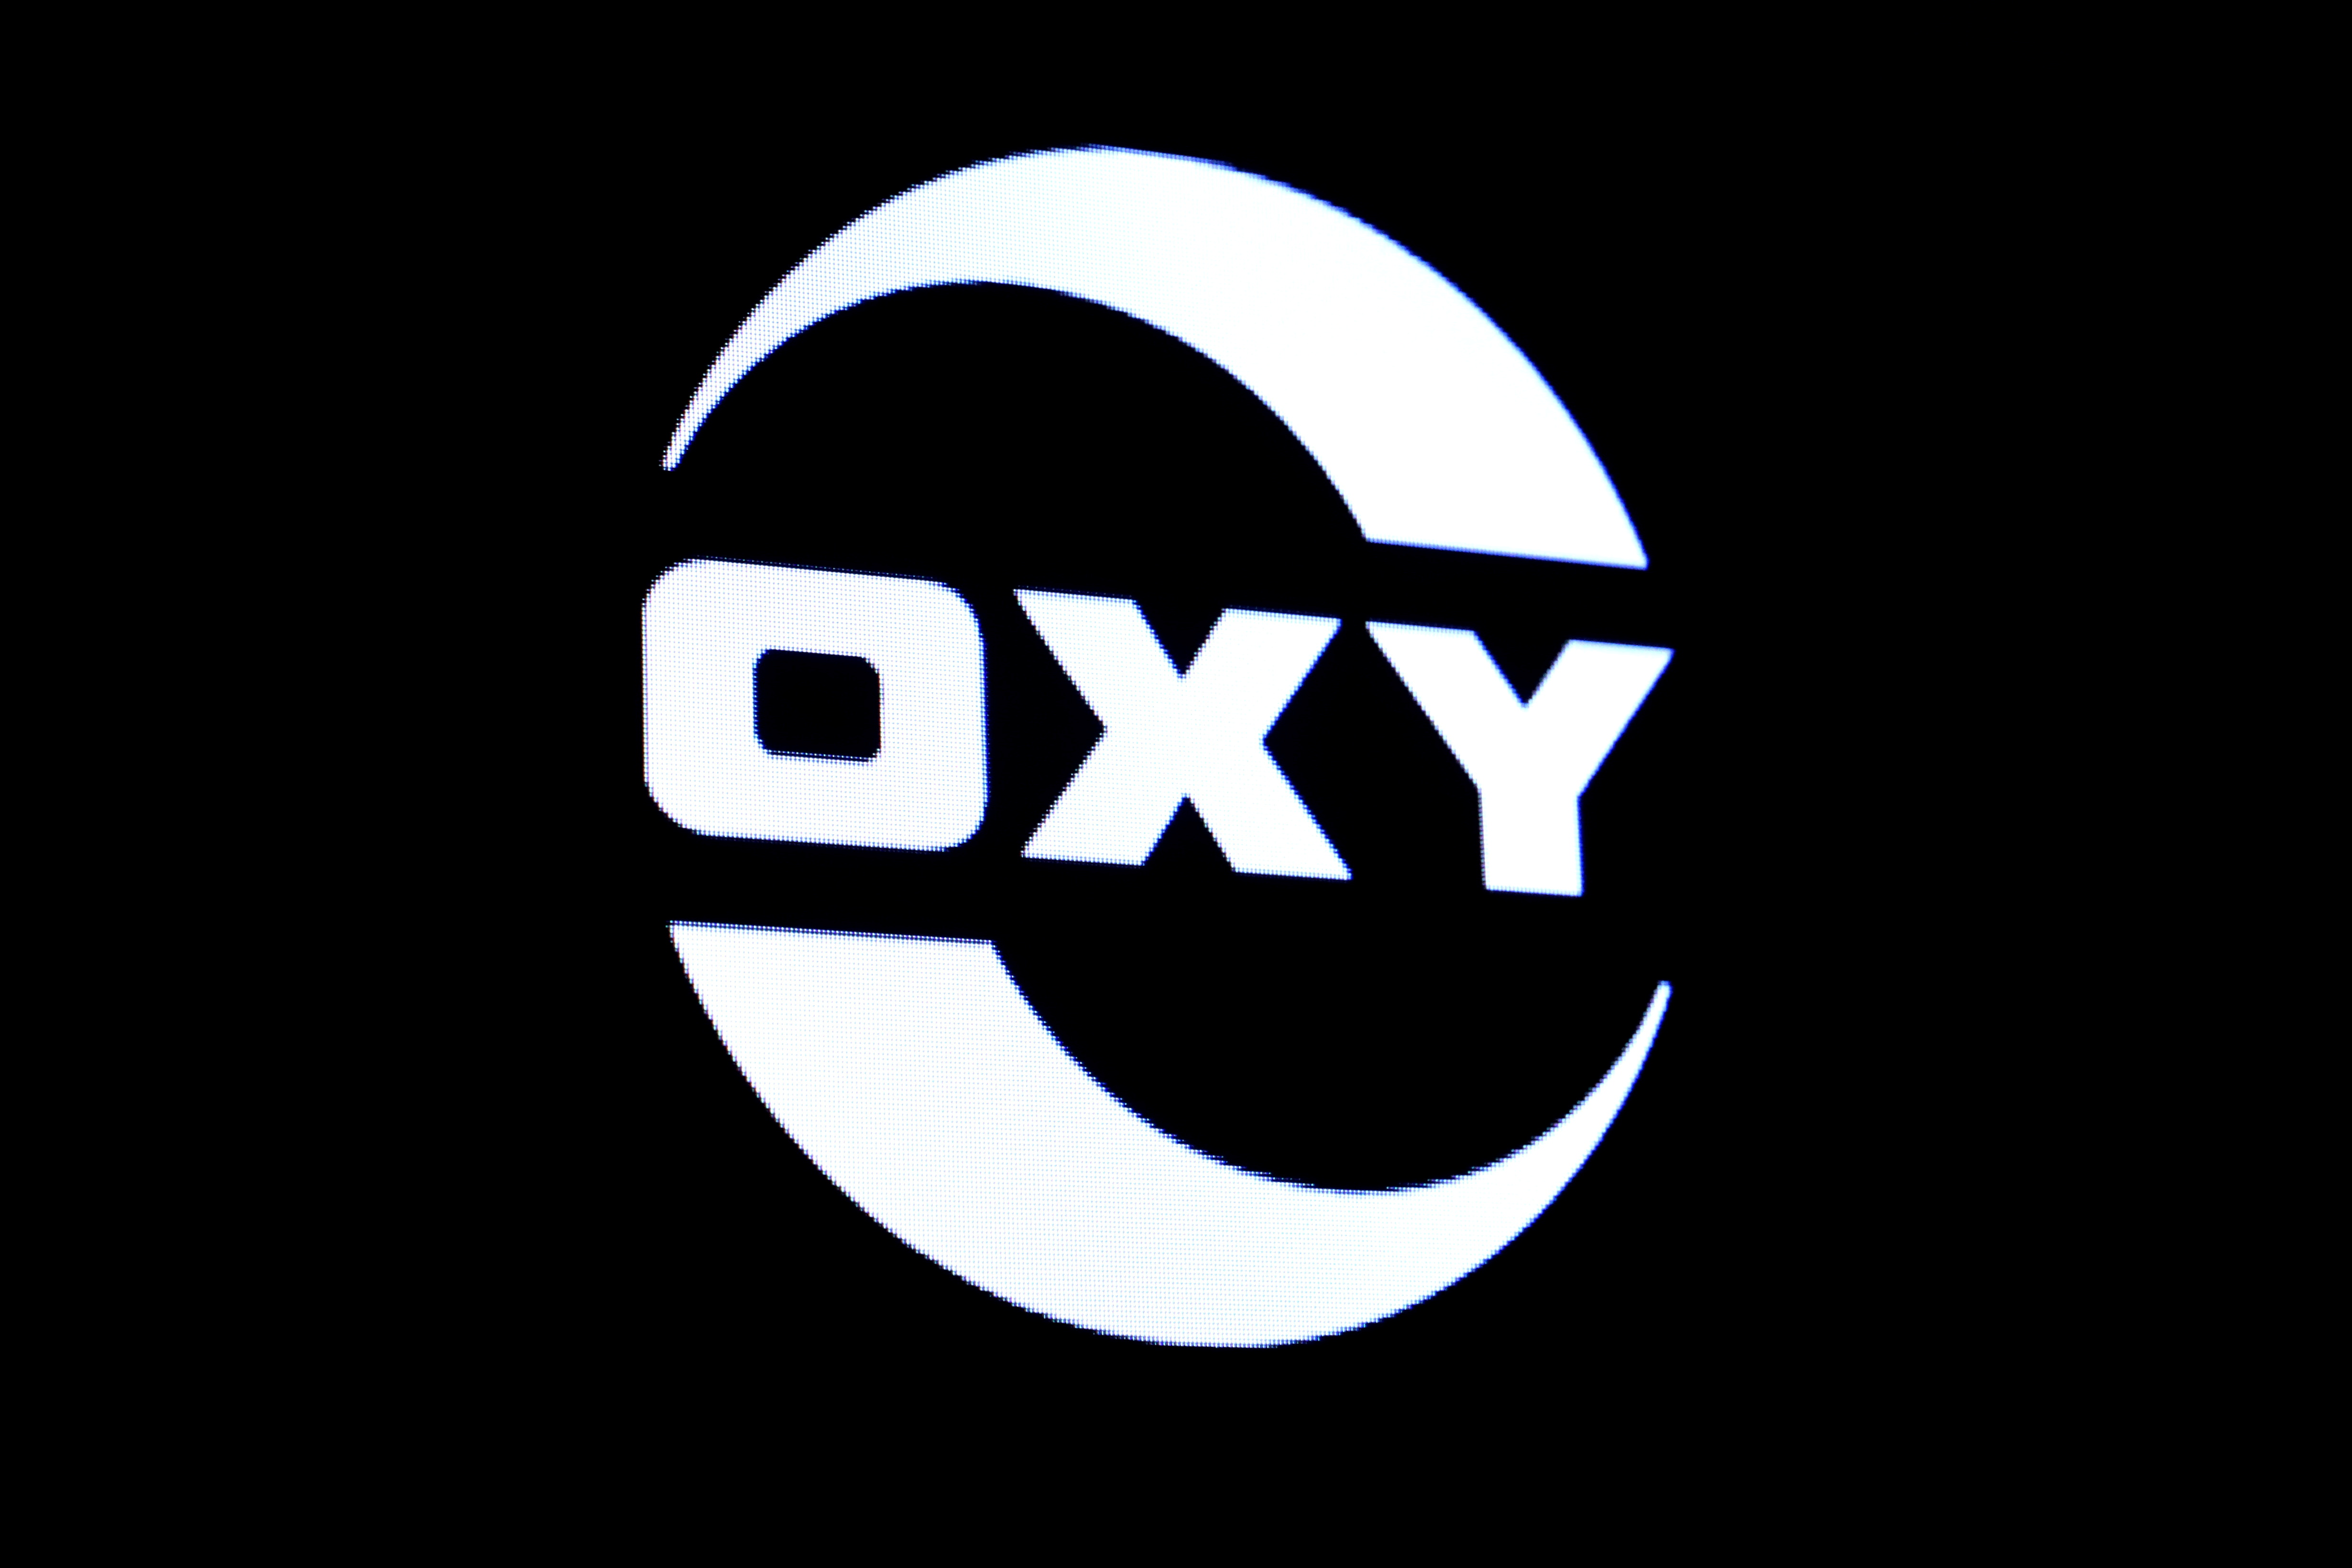 FILE PHOTO: The logo for Occidental Petroleum is displayed on a screen on the floor at the NYSE in New York